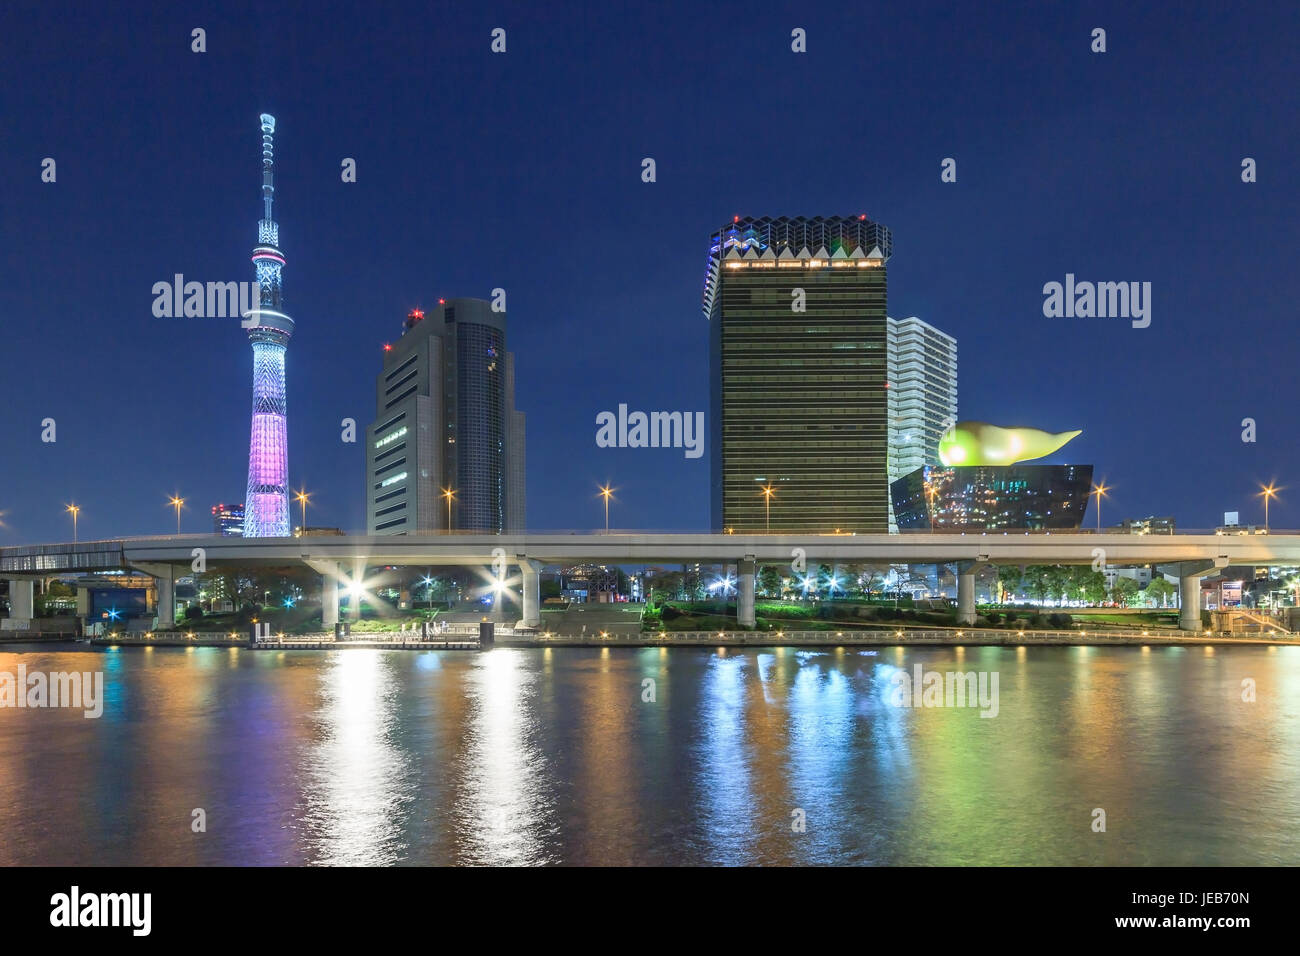 TOKYO - APRIL 12: View of Tokyo Sky Tree (634m) at night, the highest free-standing structure in Japan Stock Photo